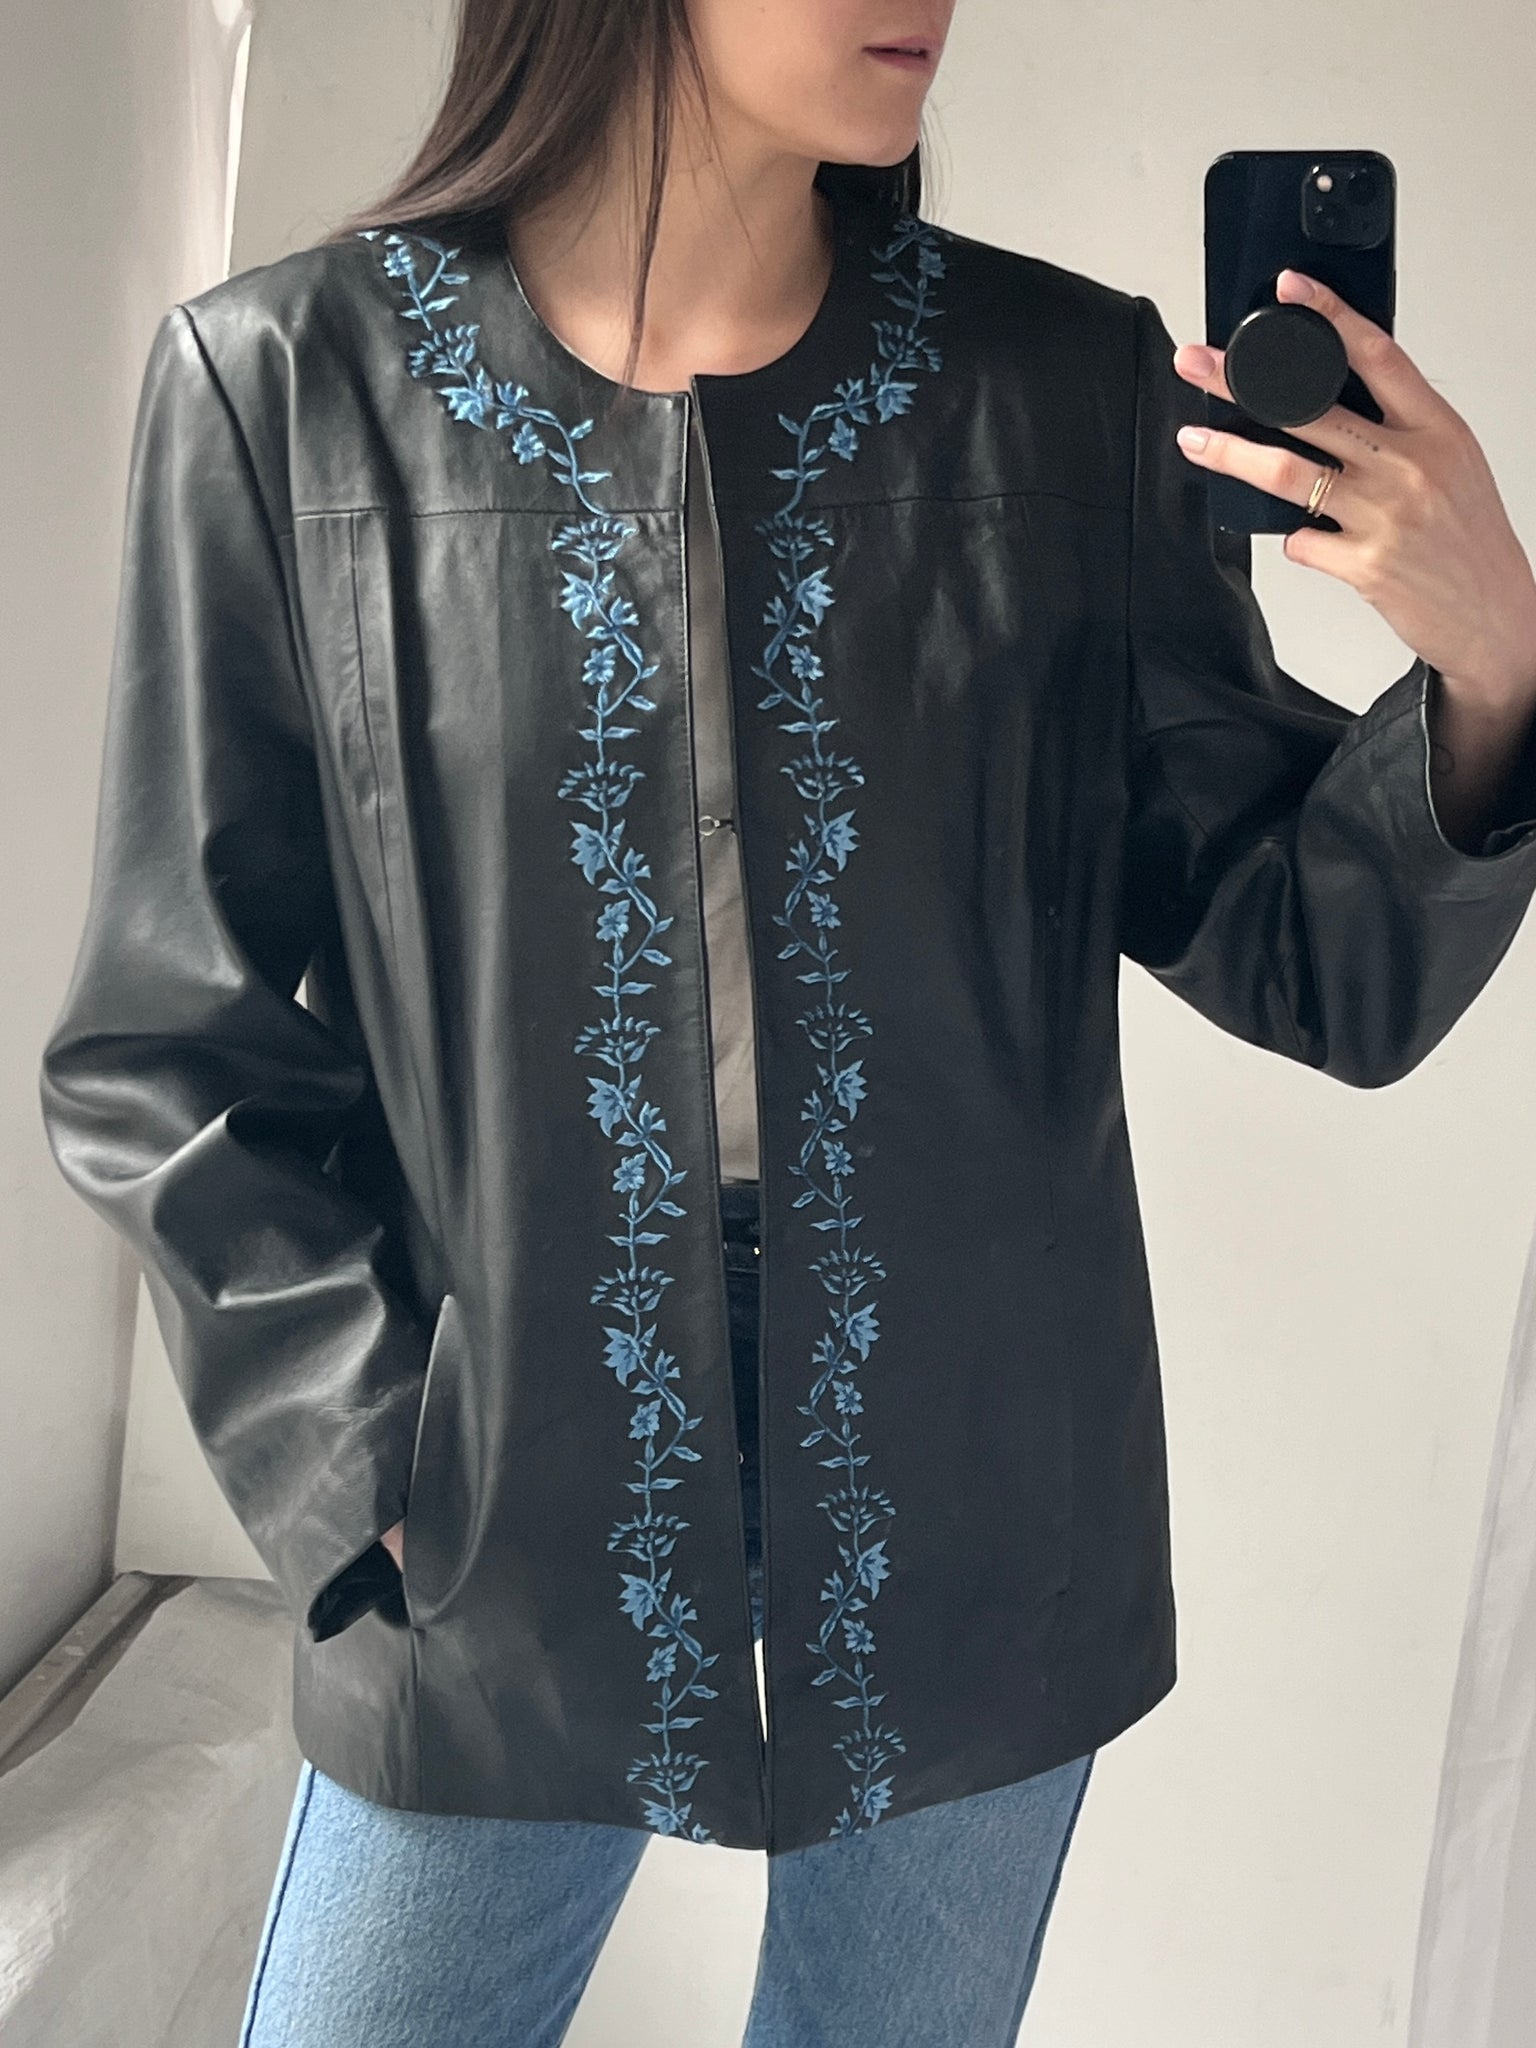 Black Leather Jacket with Blue Floral Embroidery